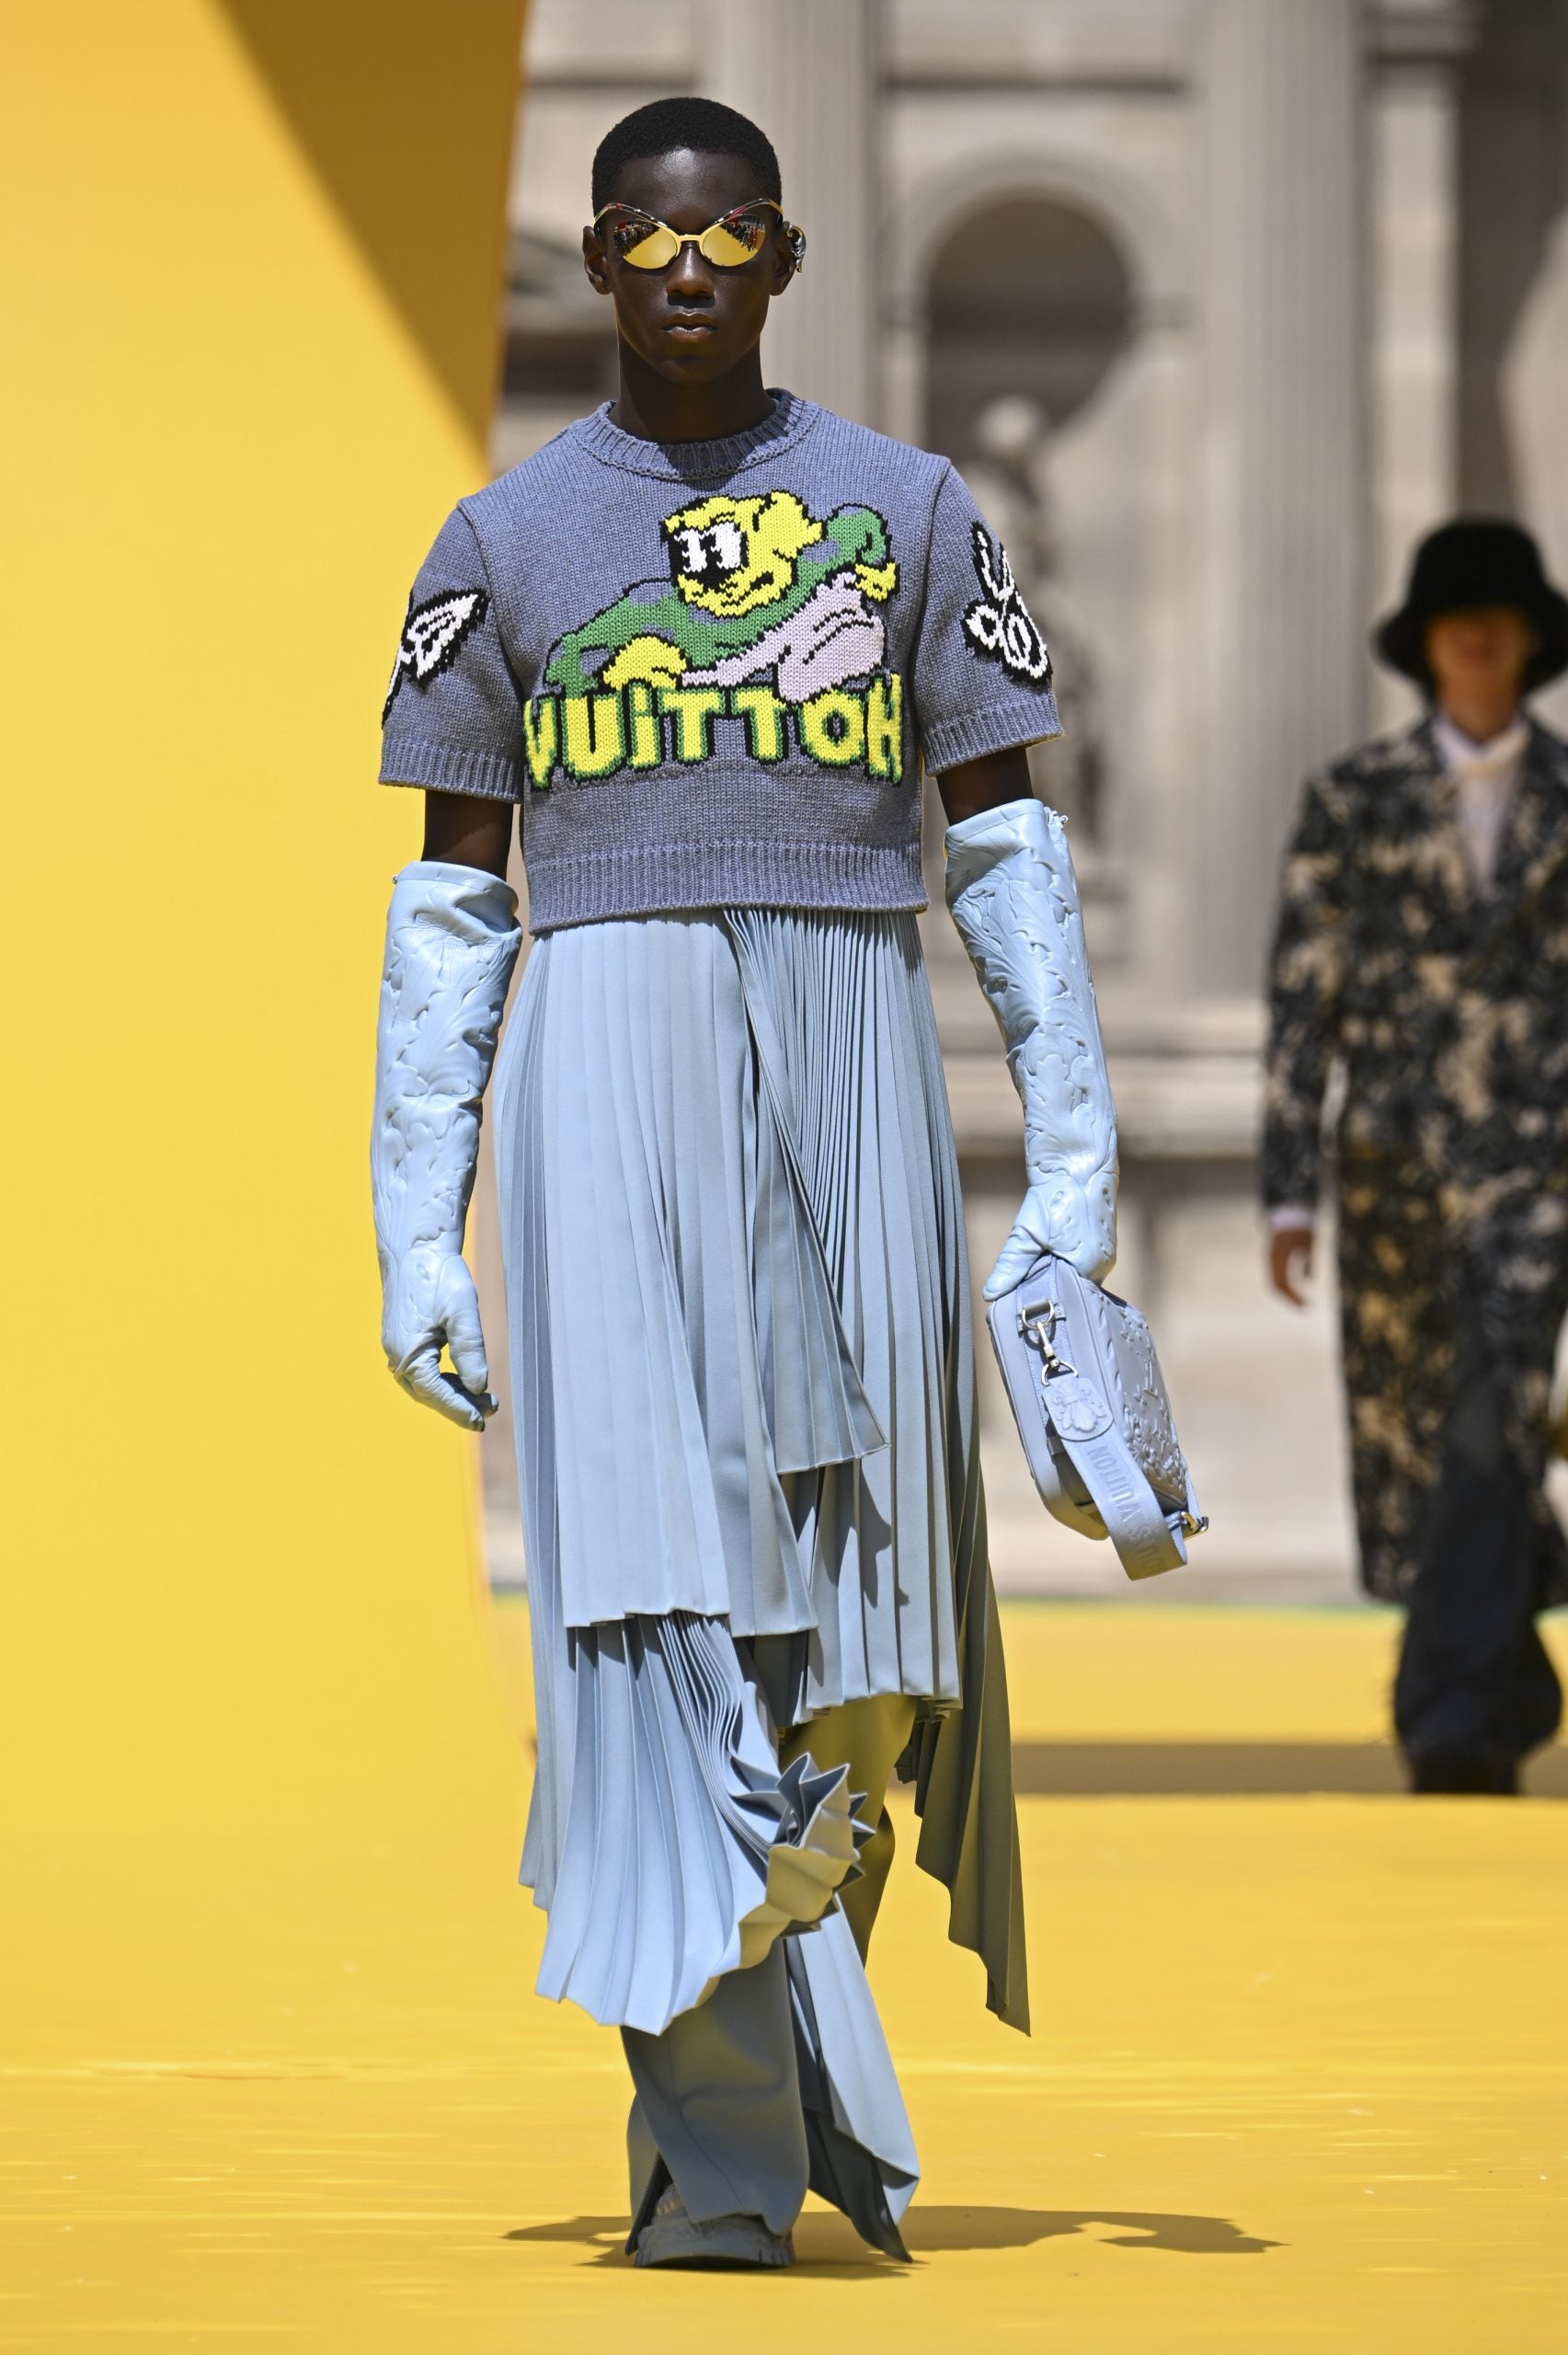 Virgil Abloh, a veteran Louis Vuitton designer and founder of the